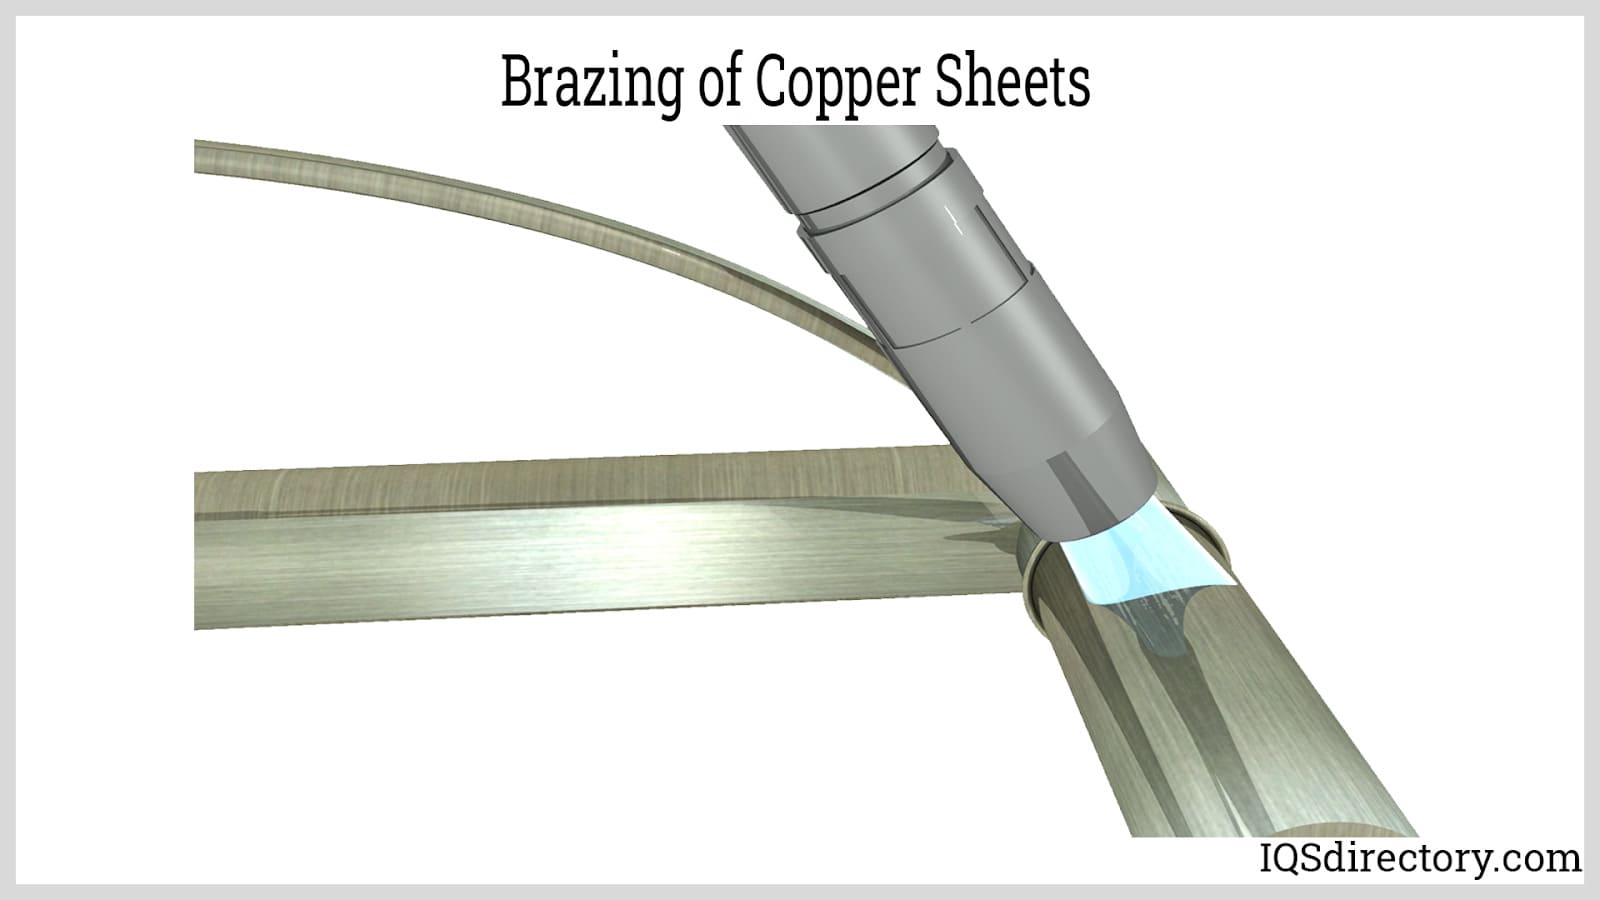 Brazing of Copper Sheets